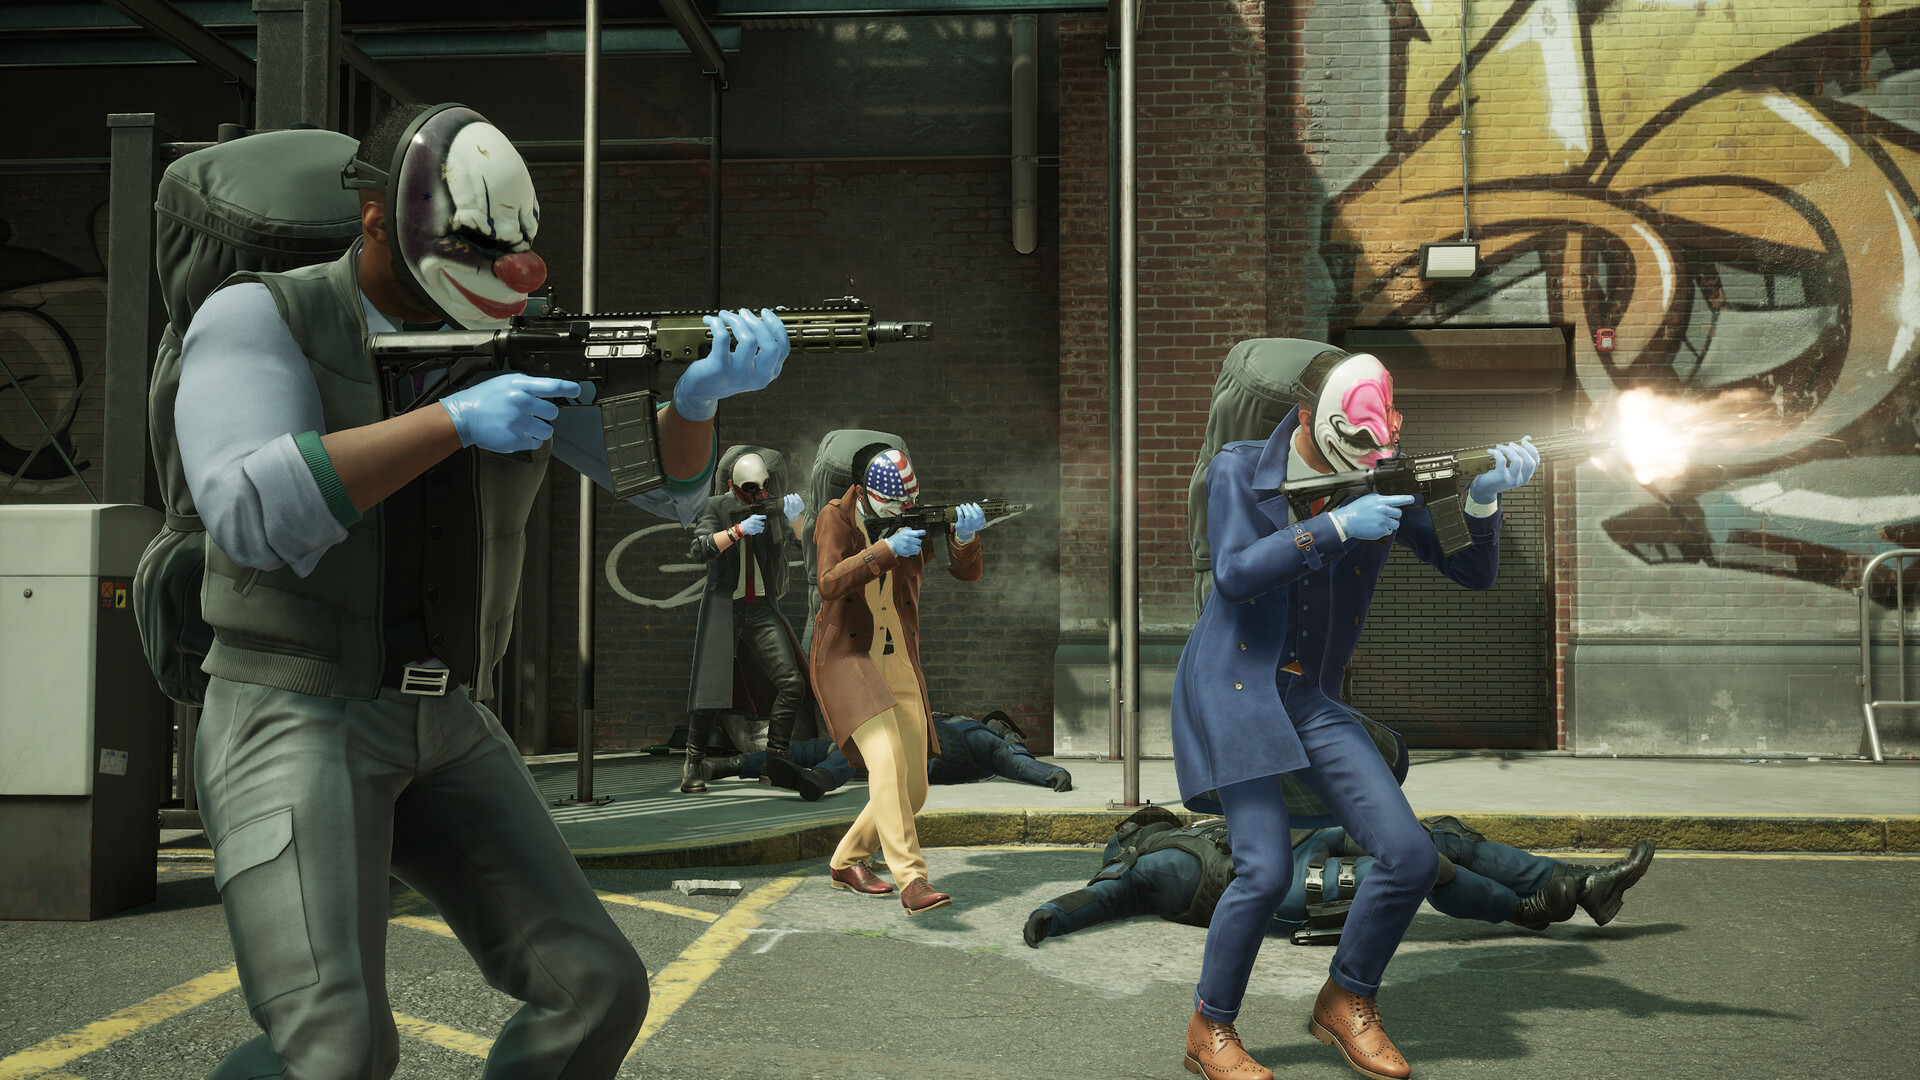 Payday 3 Producer Promises “At Least” 18 Months of Post-Launch Content